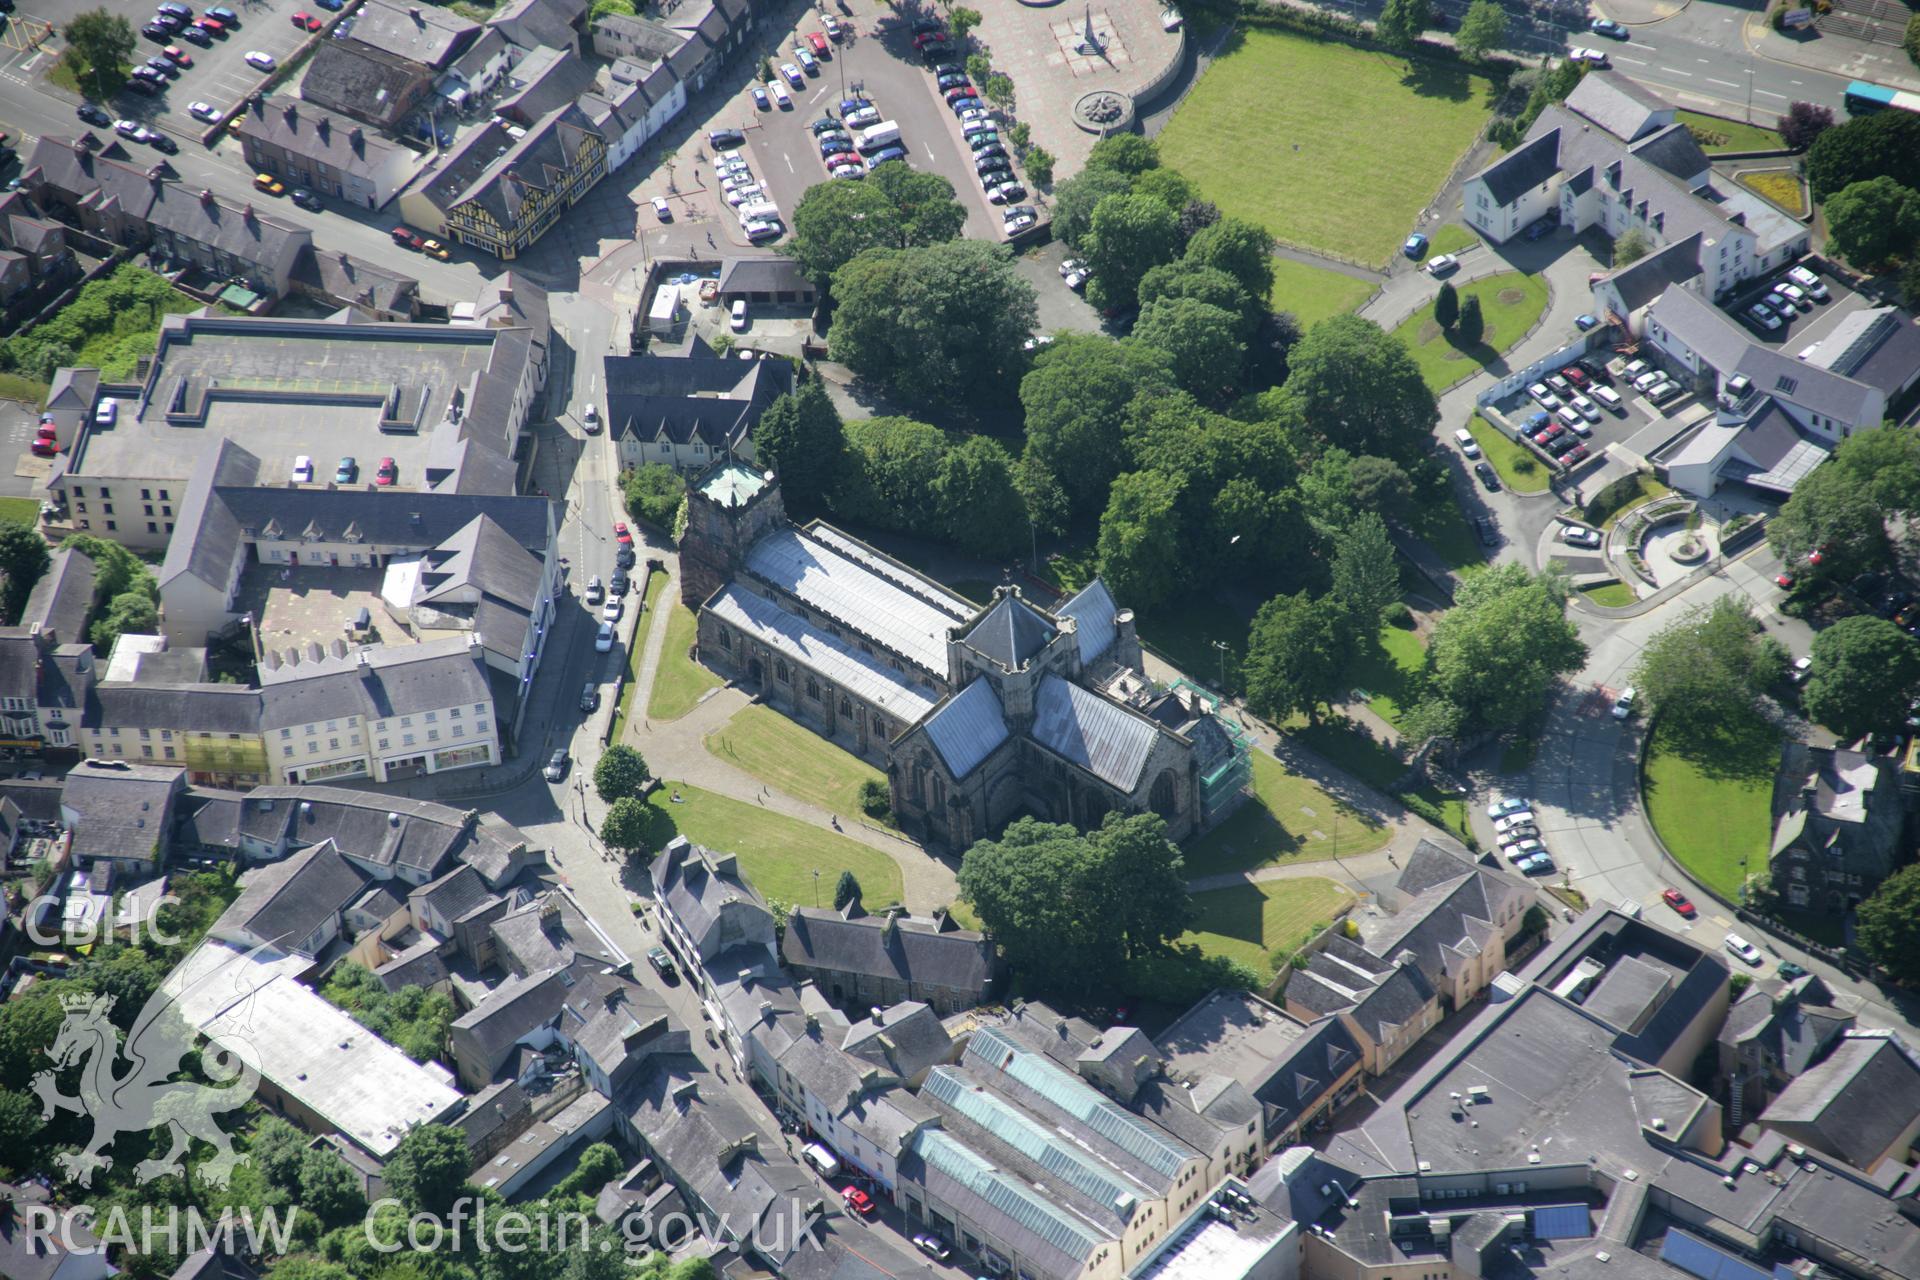 RCAHMW colour oblique aerial photograph of St Deiniol's Cathedral, Bangor. Taken on 14 June 2006 by Toby Driver.